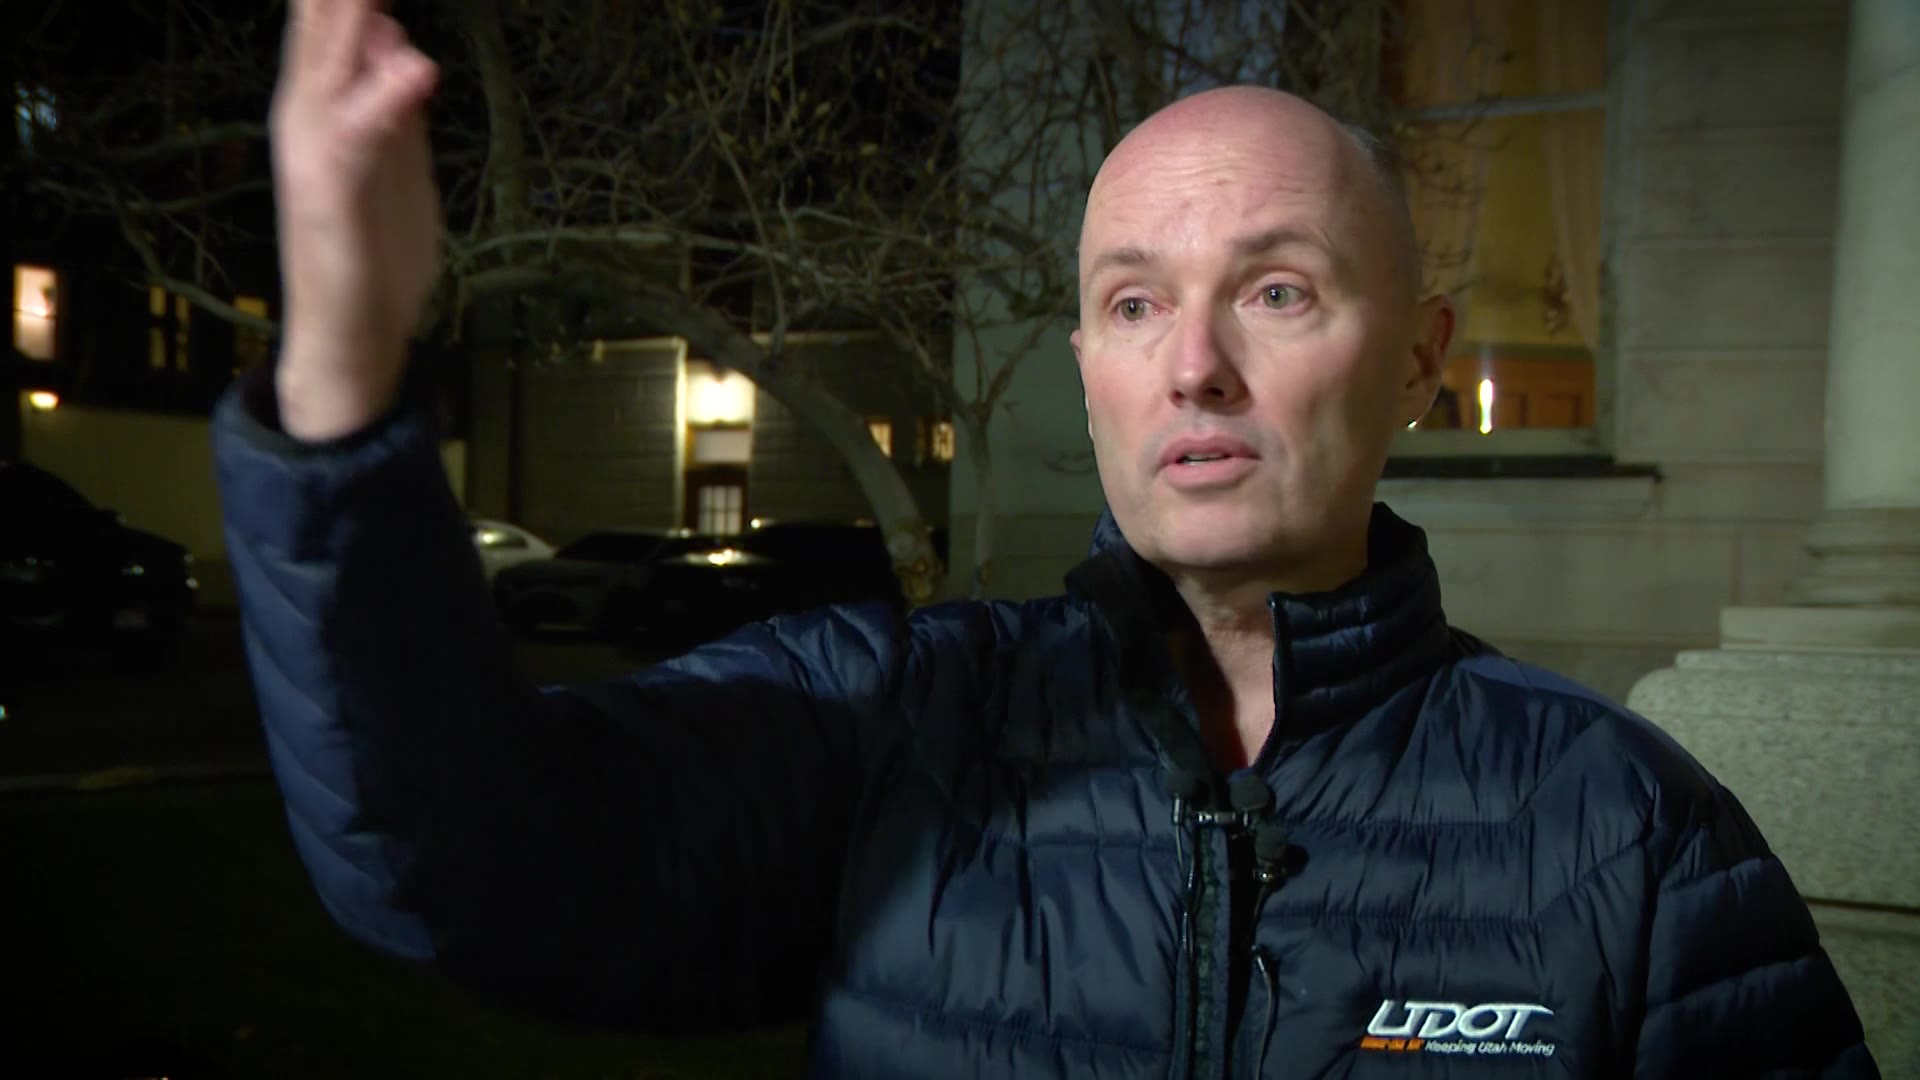 Utah Gov. Spencer Cox speaking to KSL about his experience at the U.S. Mexico border....